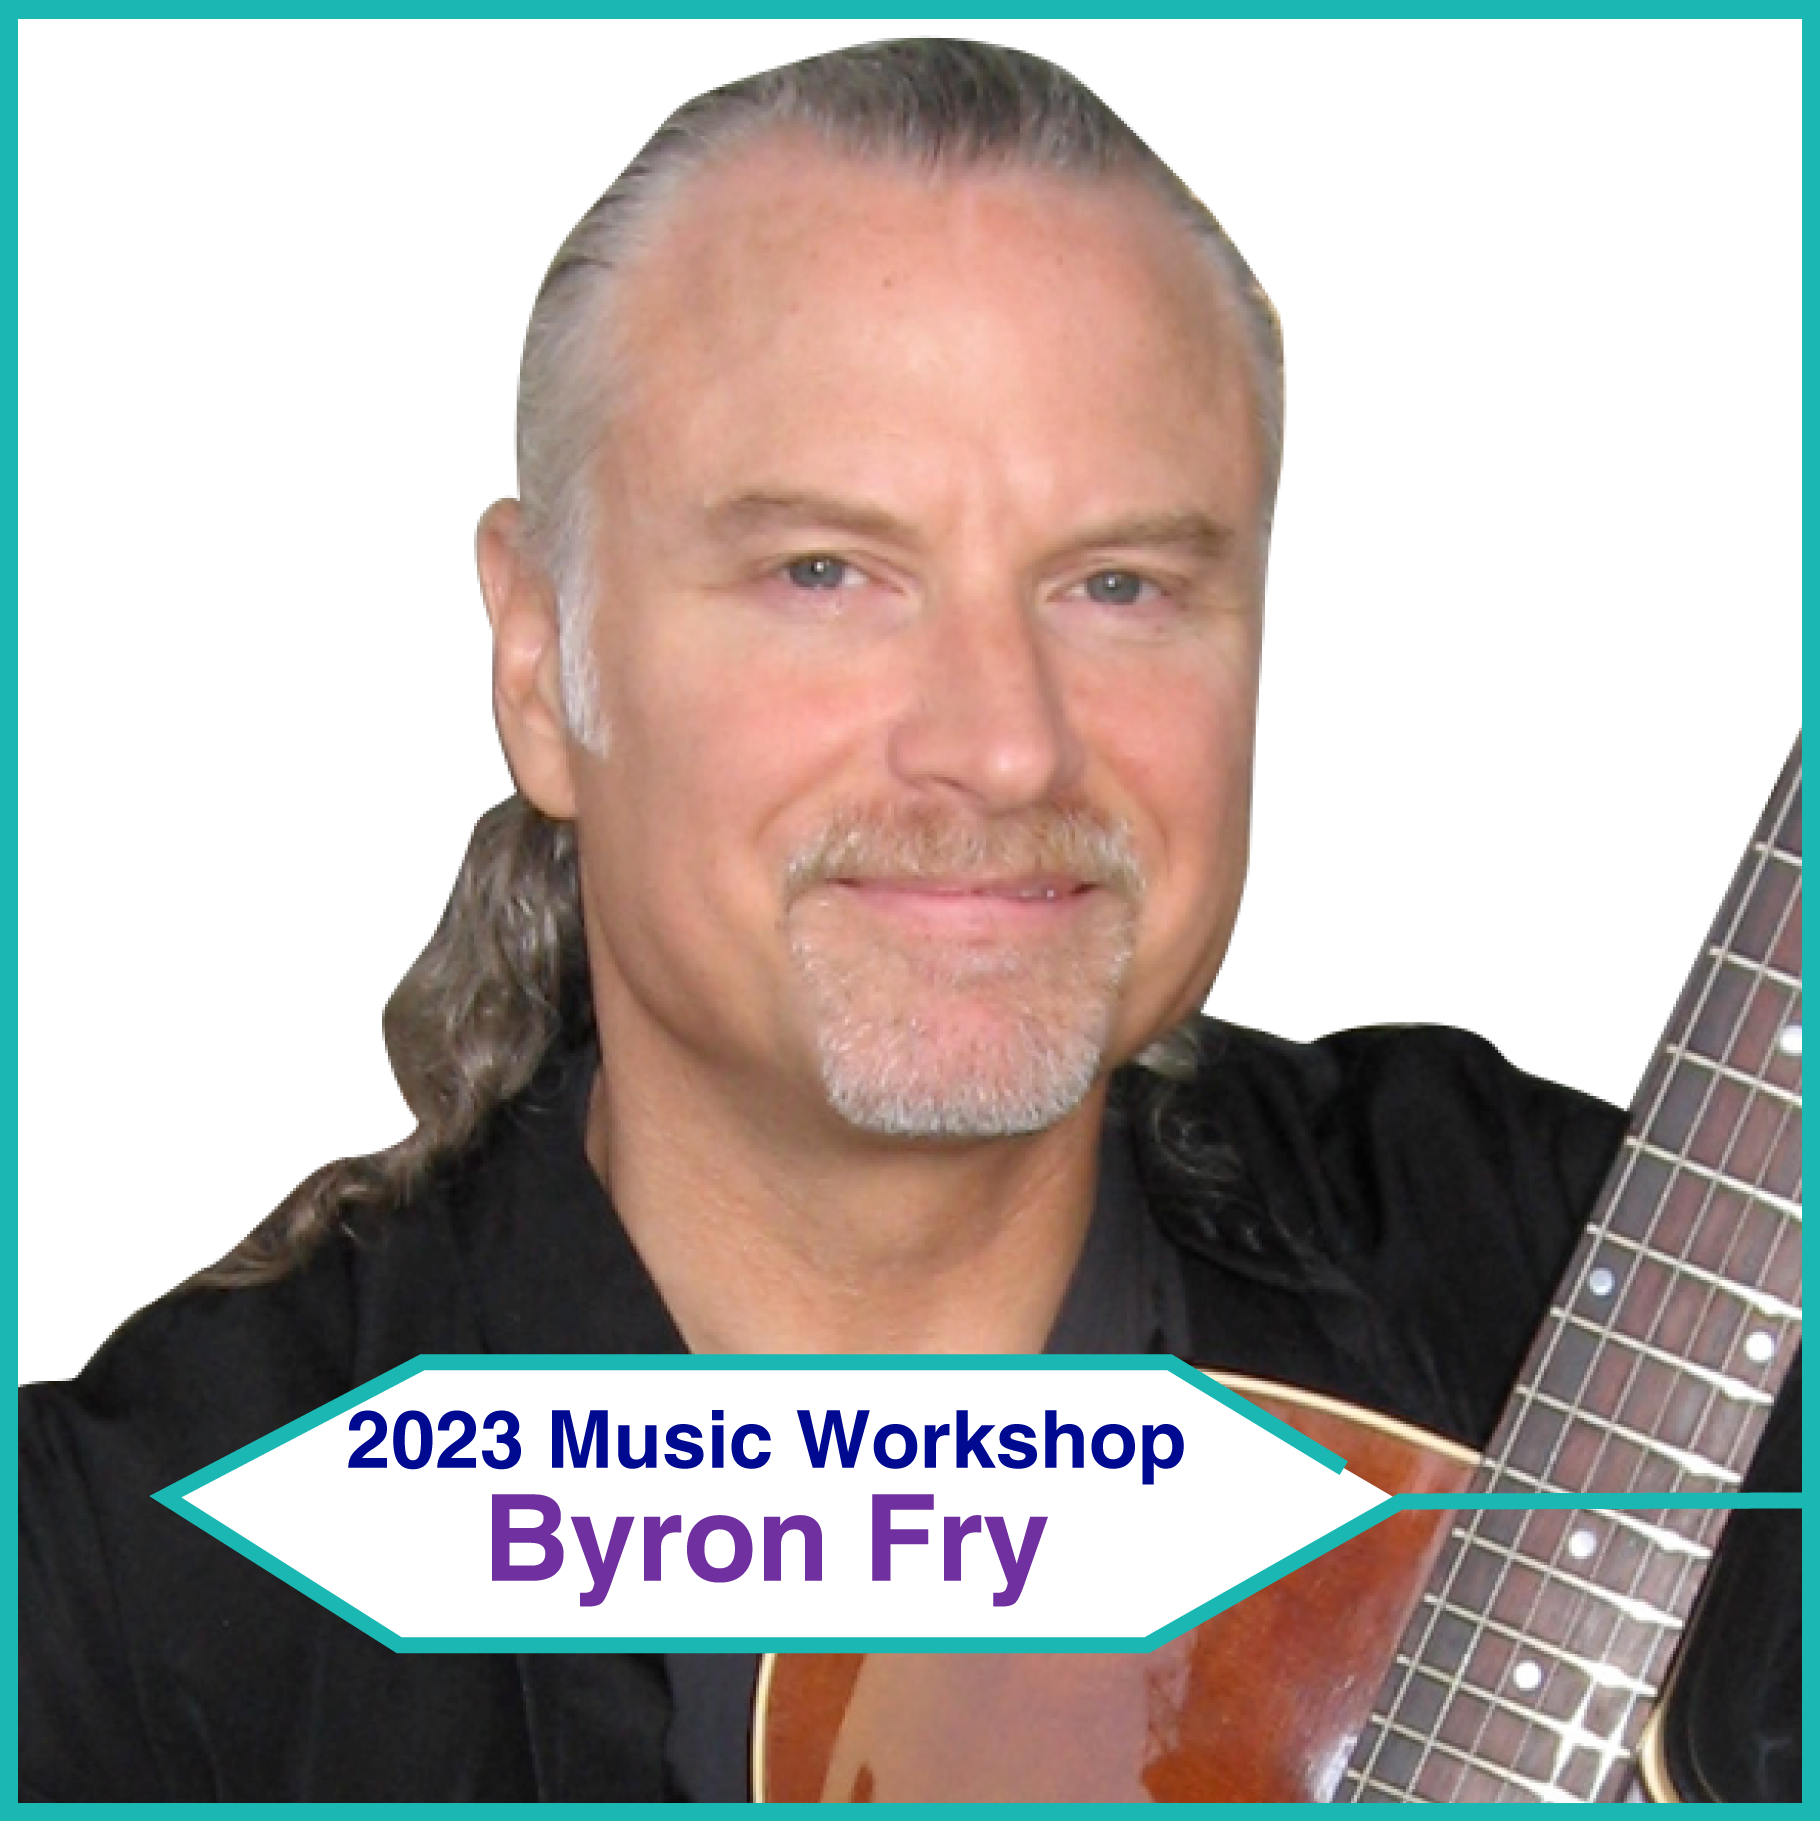 https://digifesttemecula.org/wp-content/uploads/2023/01/Byron_Fry.png